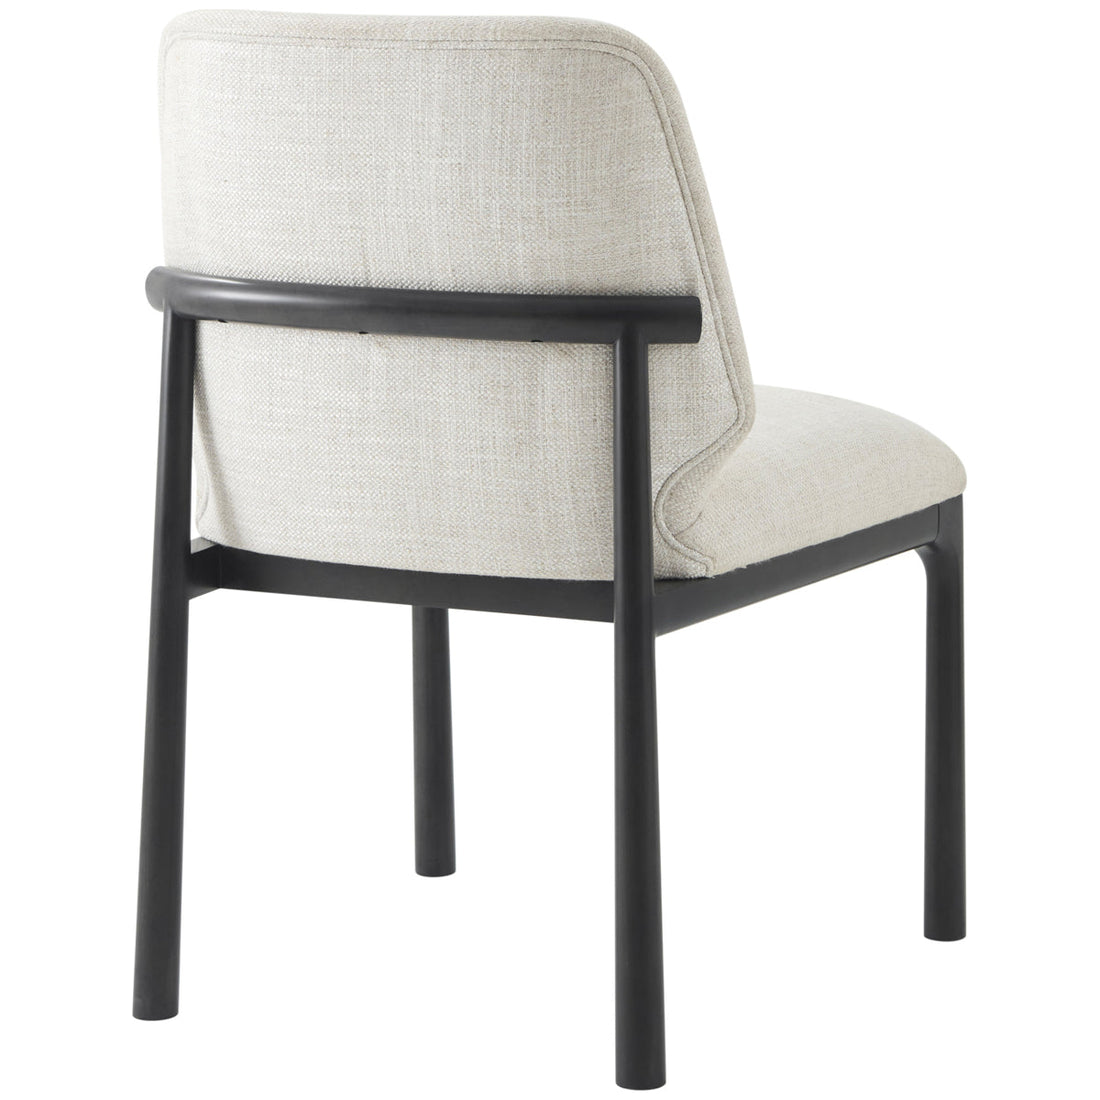 Theodore Alexander Kesden Dining Side Chair, Set of 2